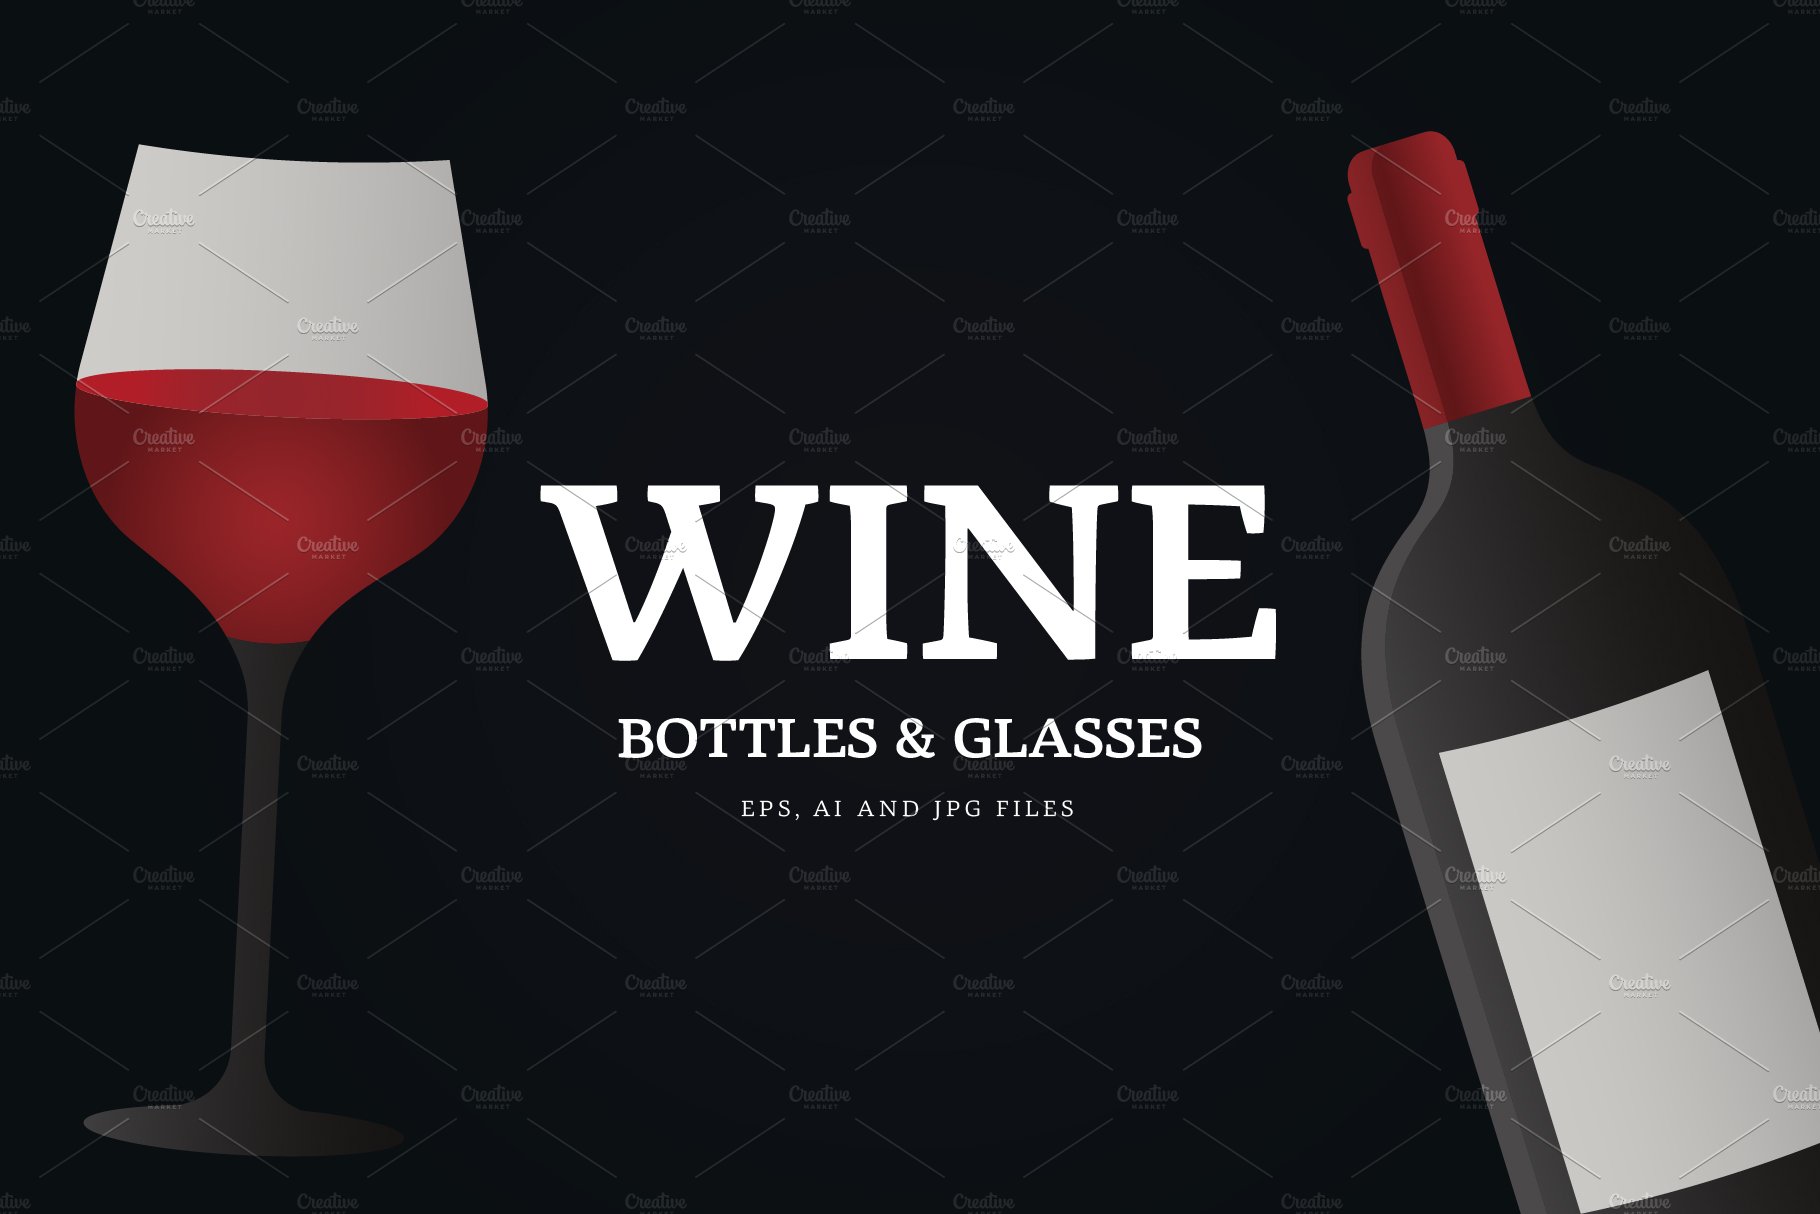 Set of wine bottles and glasses cover image.